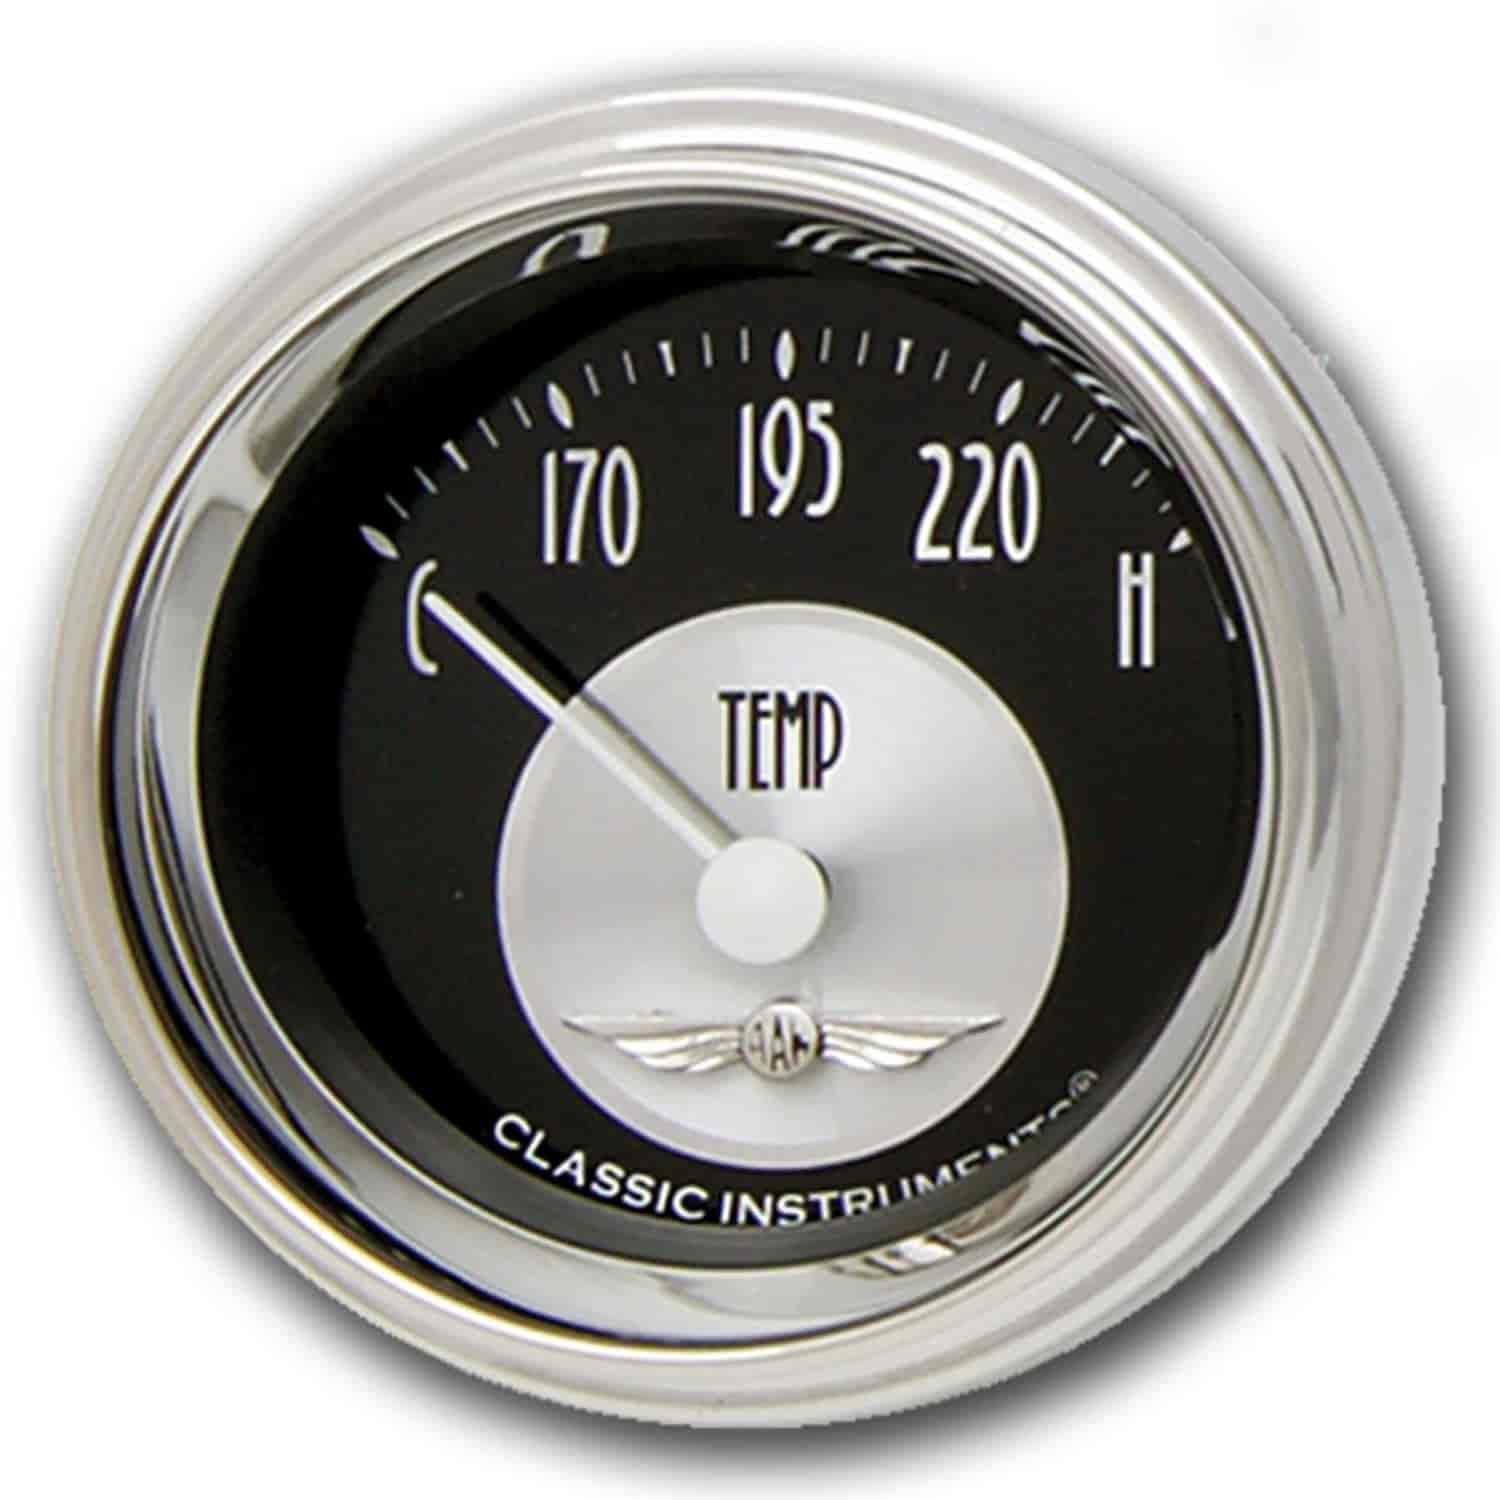 All American Tradition Water Temperature Gauge 2-1/8" Electrical